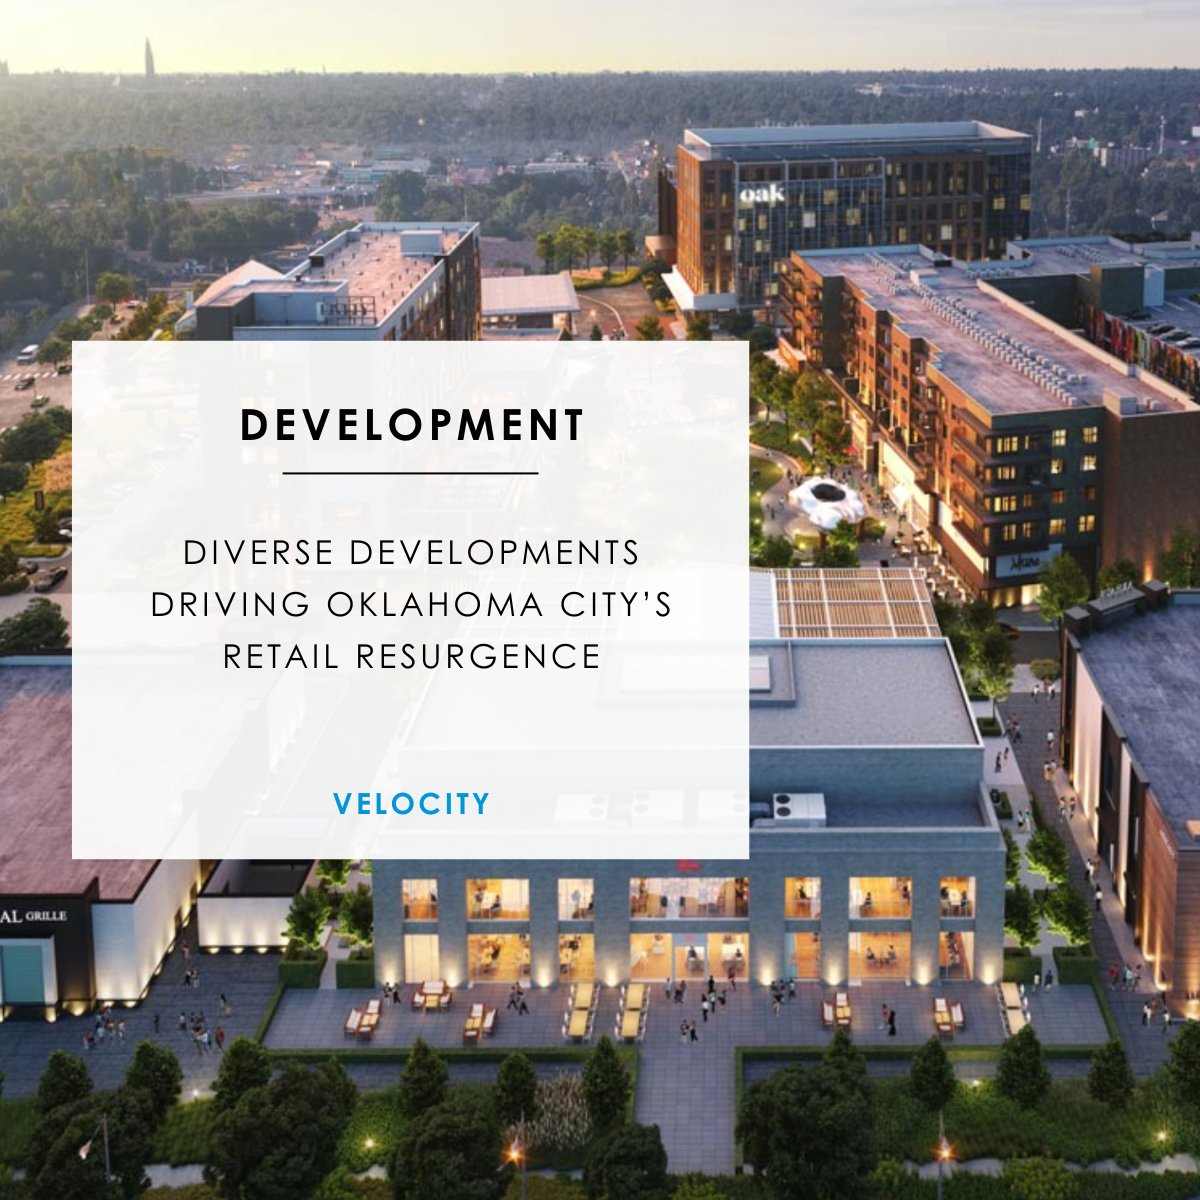 Experience the vibrant transformation of Oklahoma City! From the sleek OAK development near Penn Square to the visionary Boardwalk at Bricktown proposal, OKC's retail and entertainment scene is reaching new heights. Discover the development resurgence: bit.ly/42B5o1F